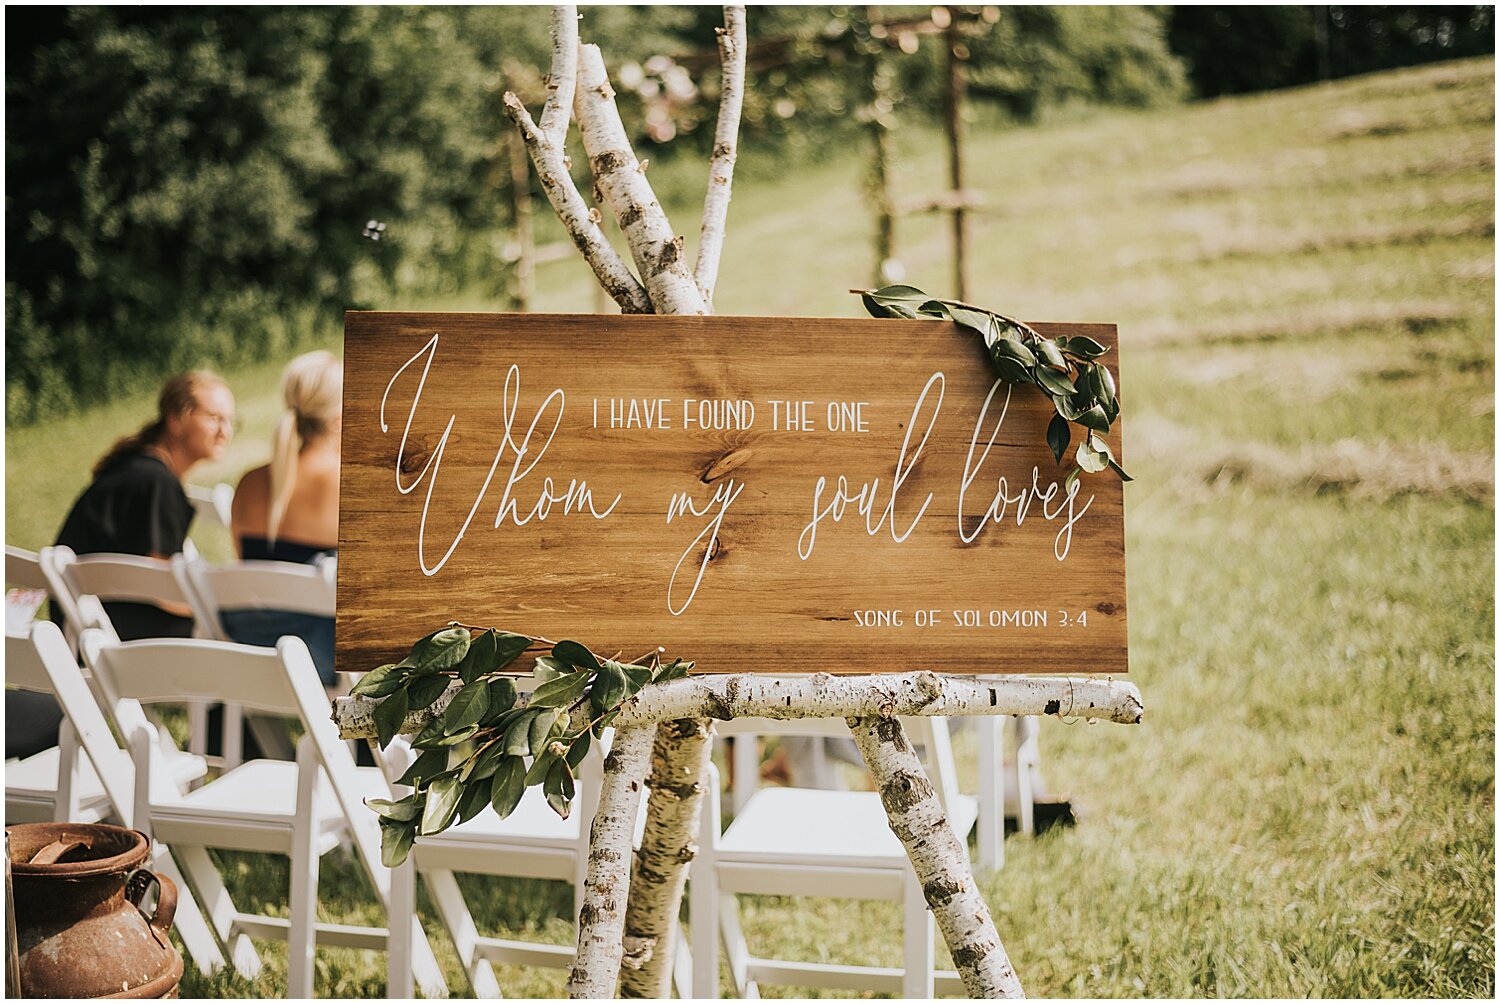  welcome wood sign for outdoor wedding ceremony 